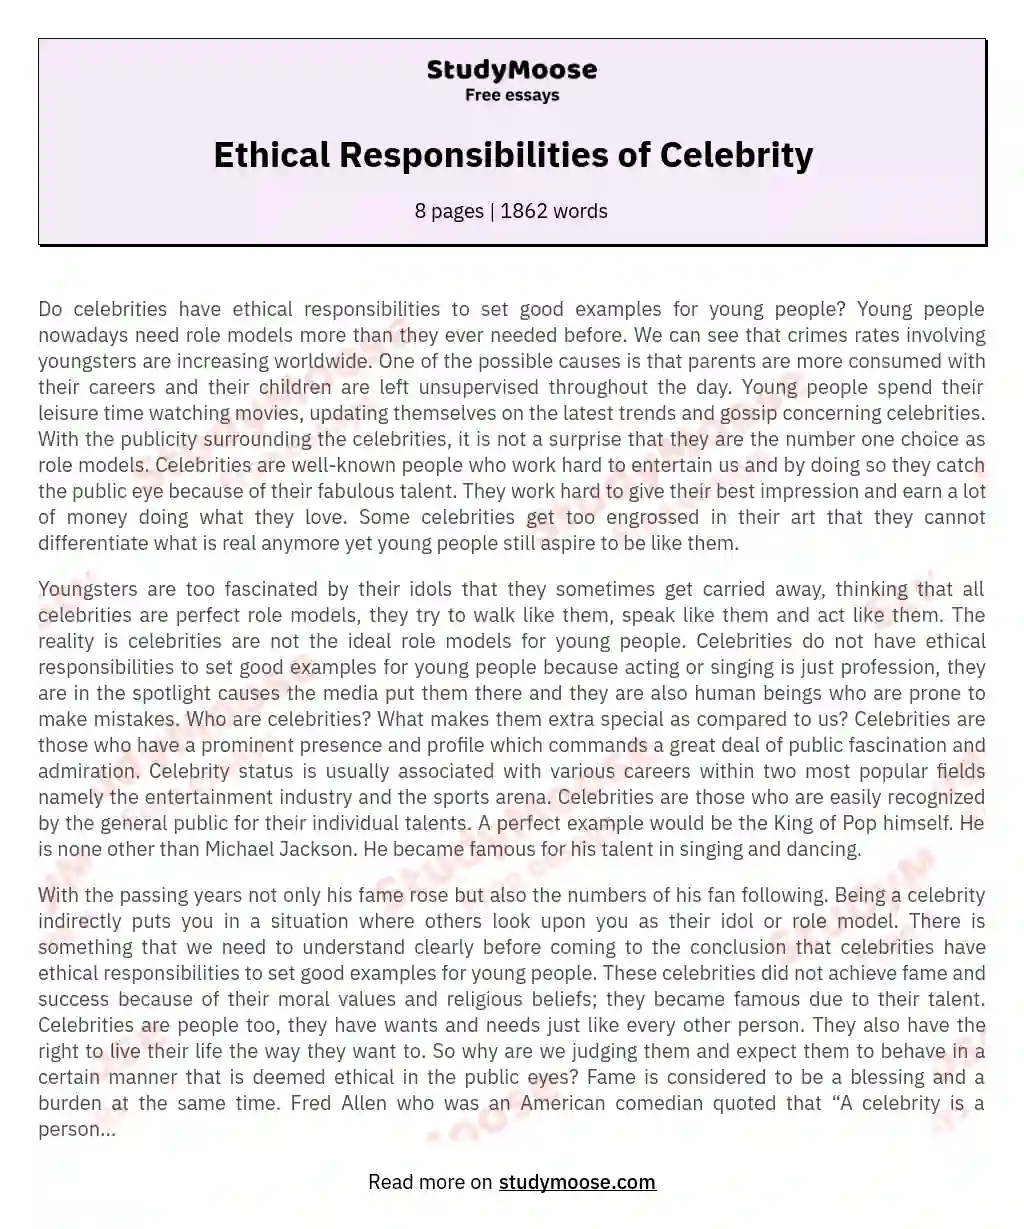 Ethical Responsibilities of Celebrity essay